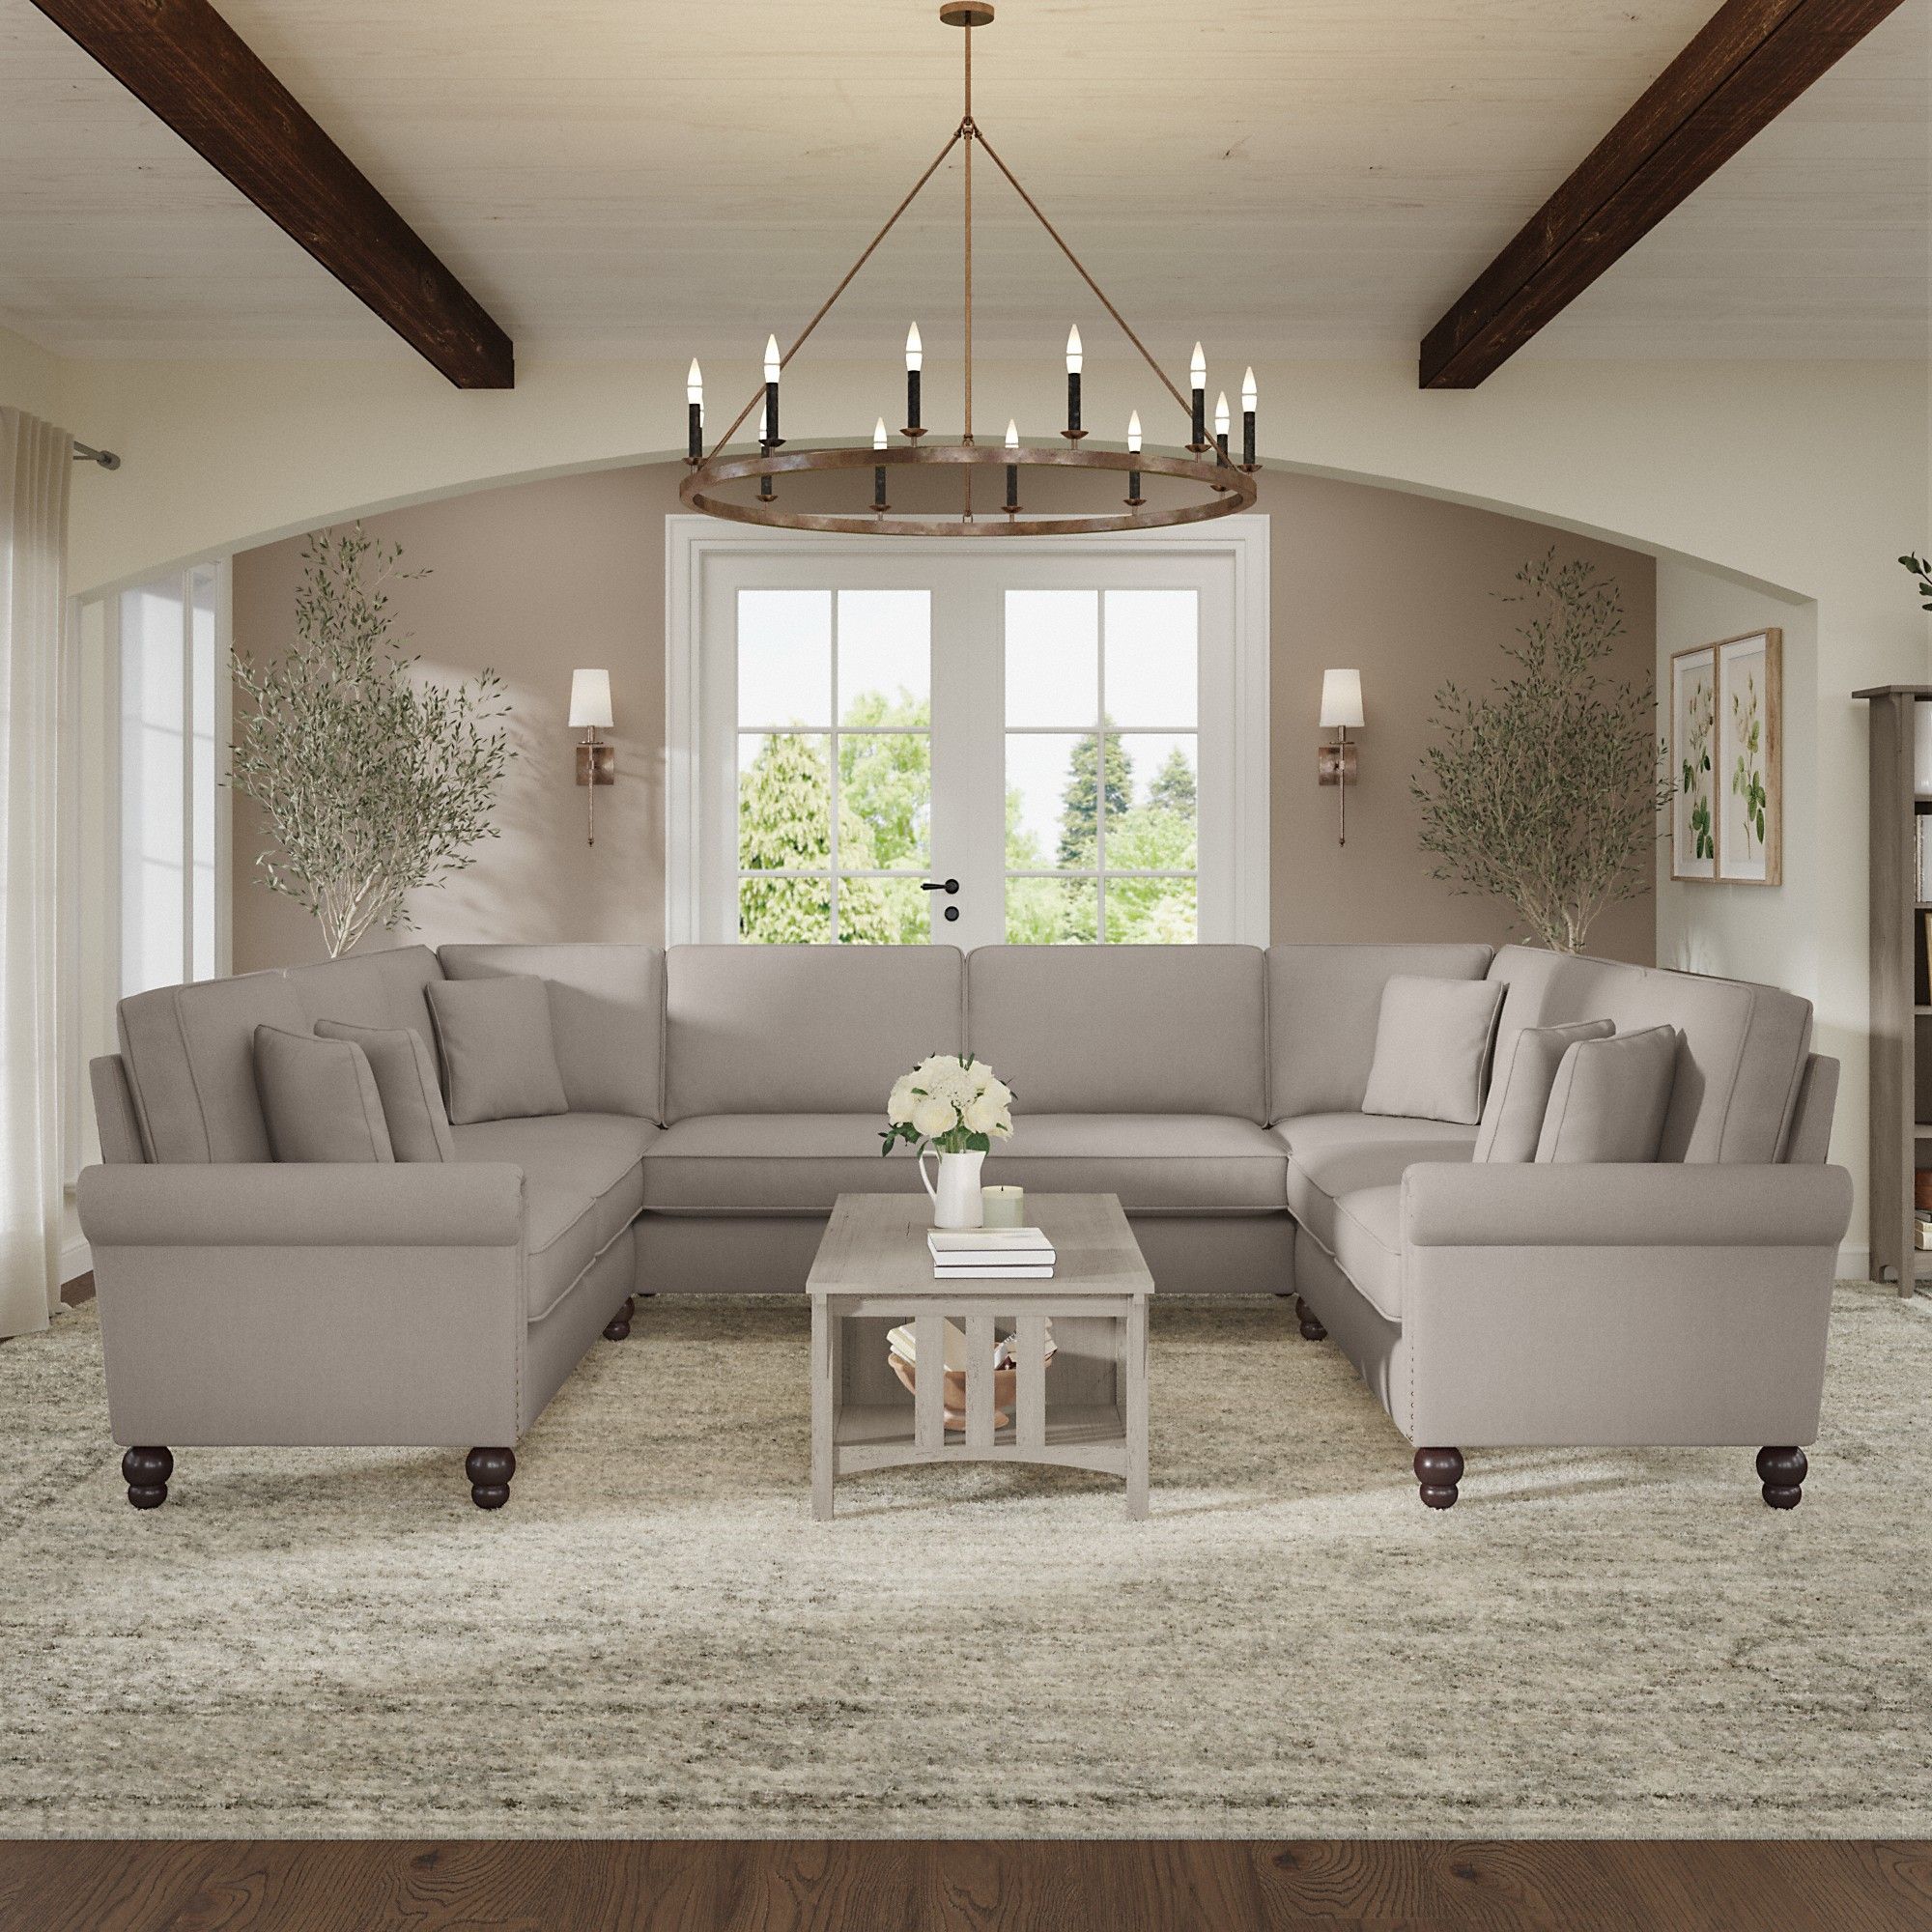 125w U Shaped Symmetrical Sectional In Beigebush Intended For U Shaped Couches In Beige (View 6 of 15)